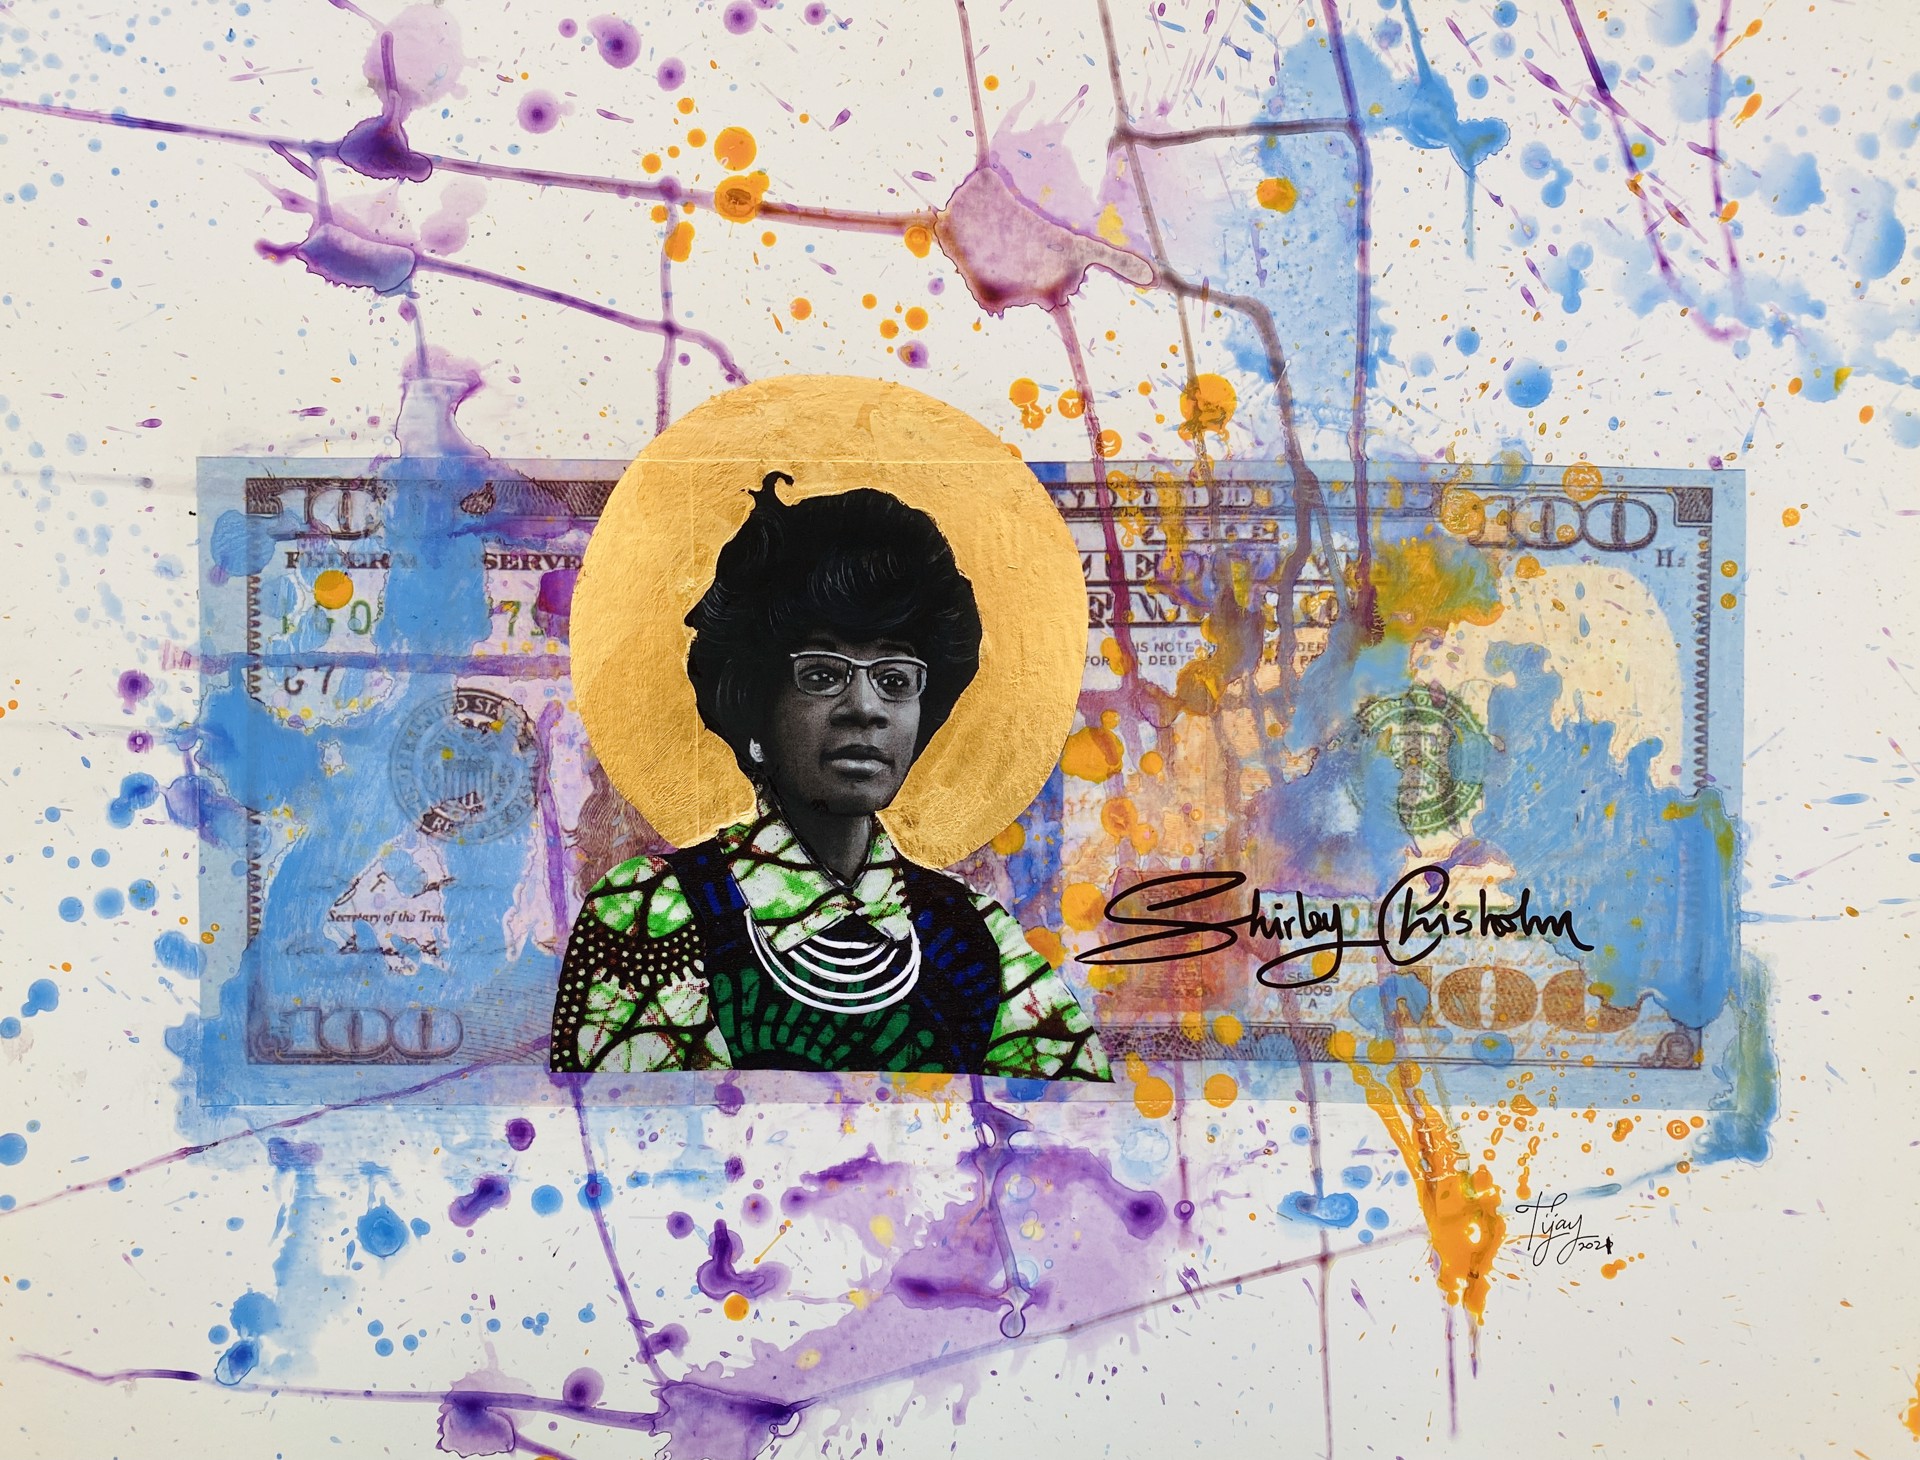 The Pride of Our Village, Shirley Chisholm by Tijay Mohammed